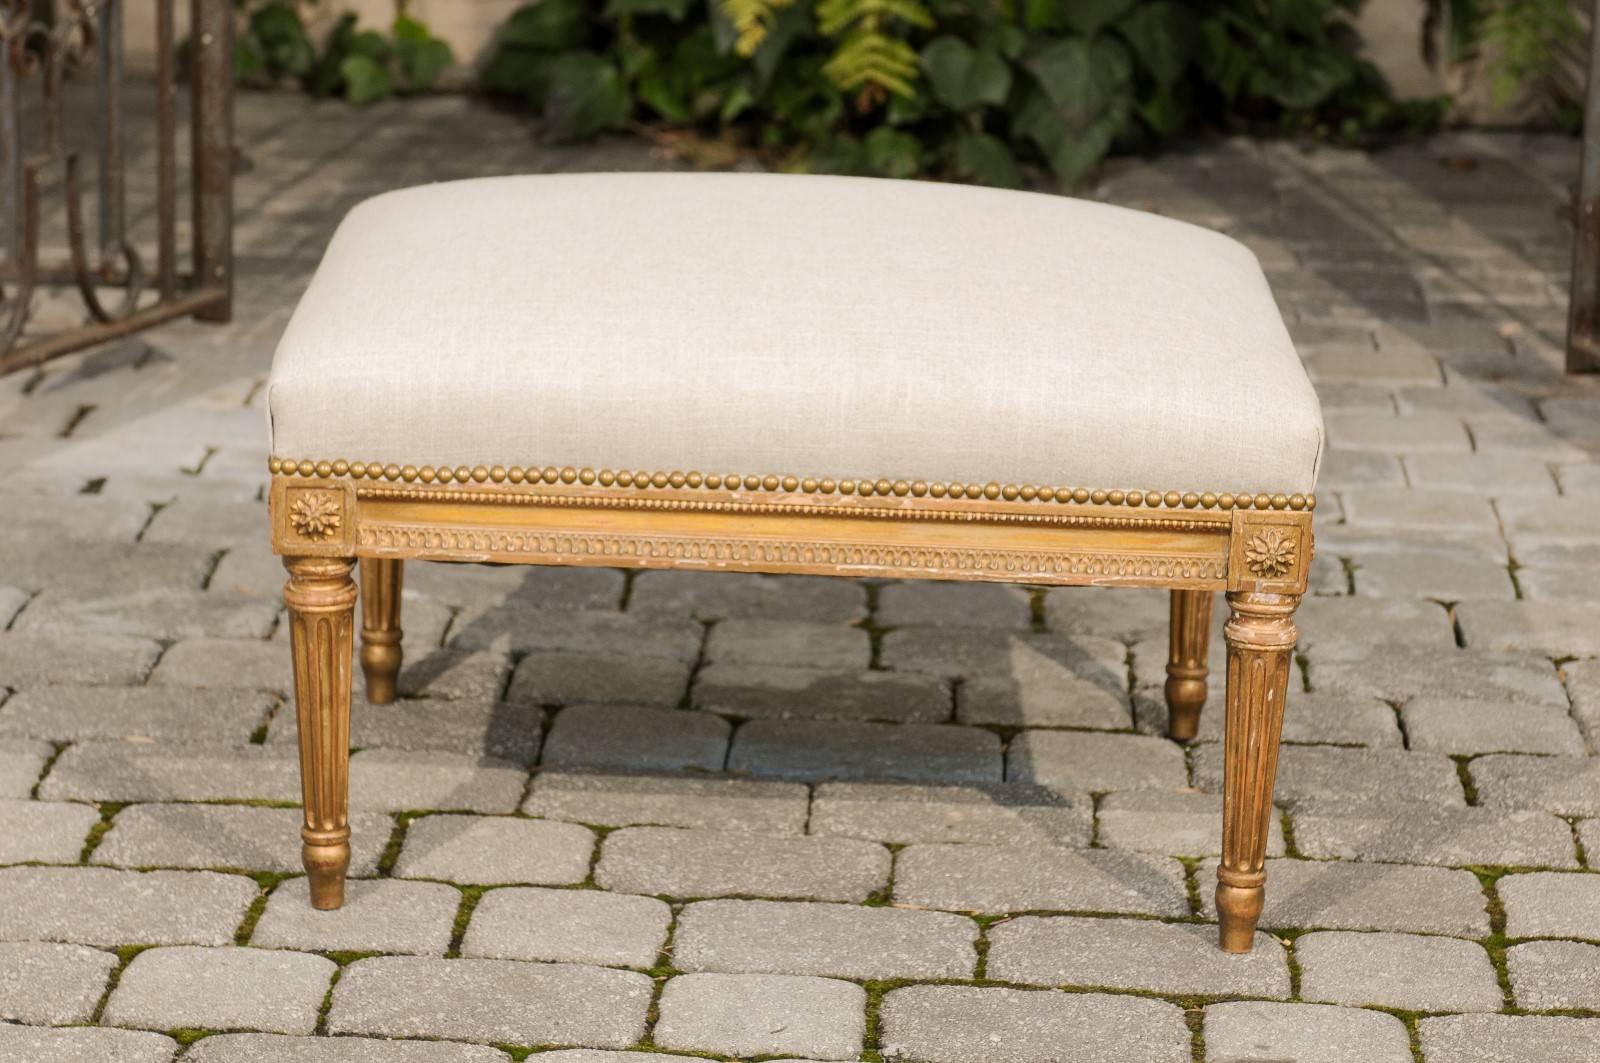 A French Louis XVI style giltwood ottoman from the early 20th century with upholstered seat and nailhead trim. This French Louis XVI style ottoman features a rectangular seat newly recovered in a simple linen fabric with brass nailhead trim. The